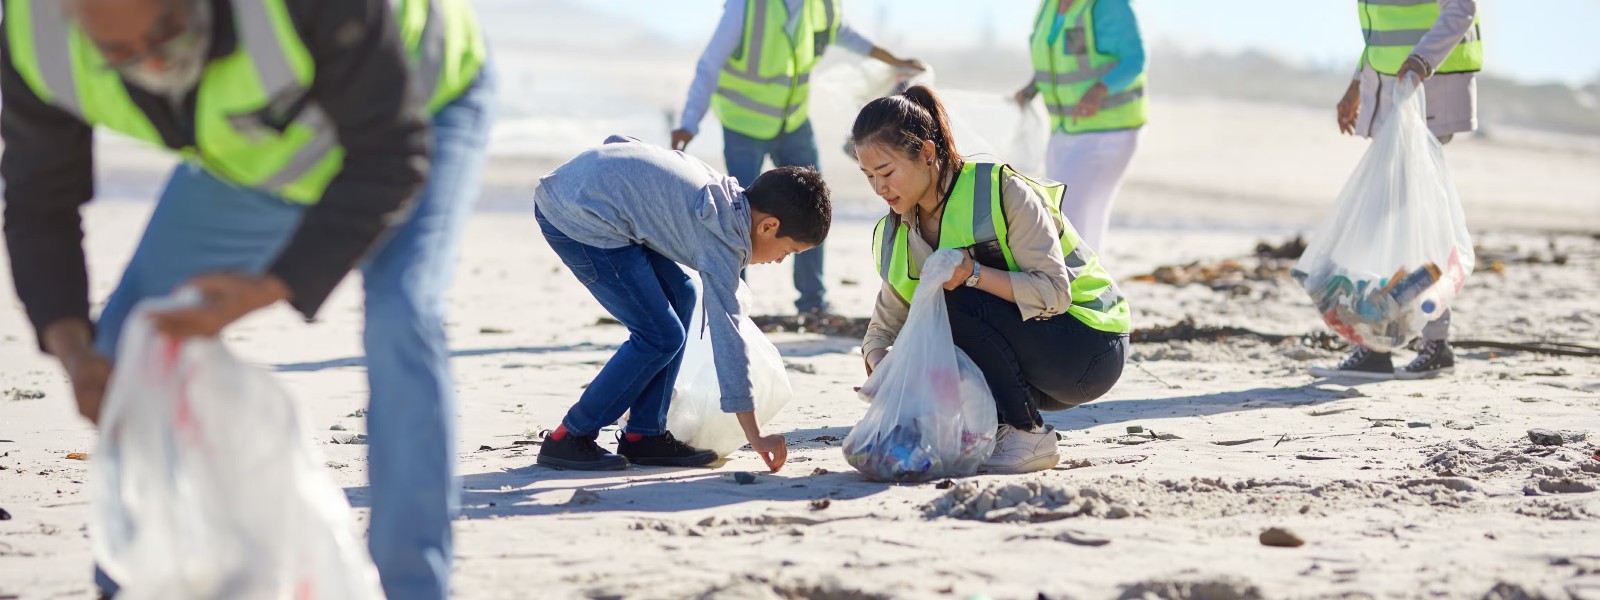 Today is International Beach Cleanup Day